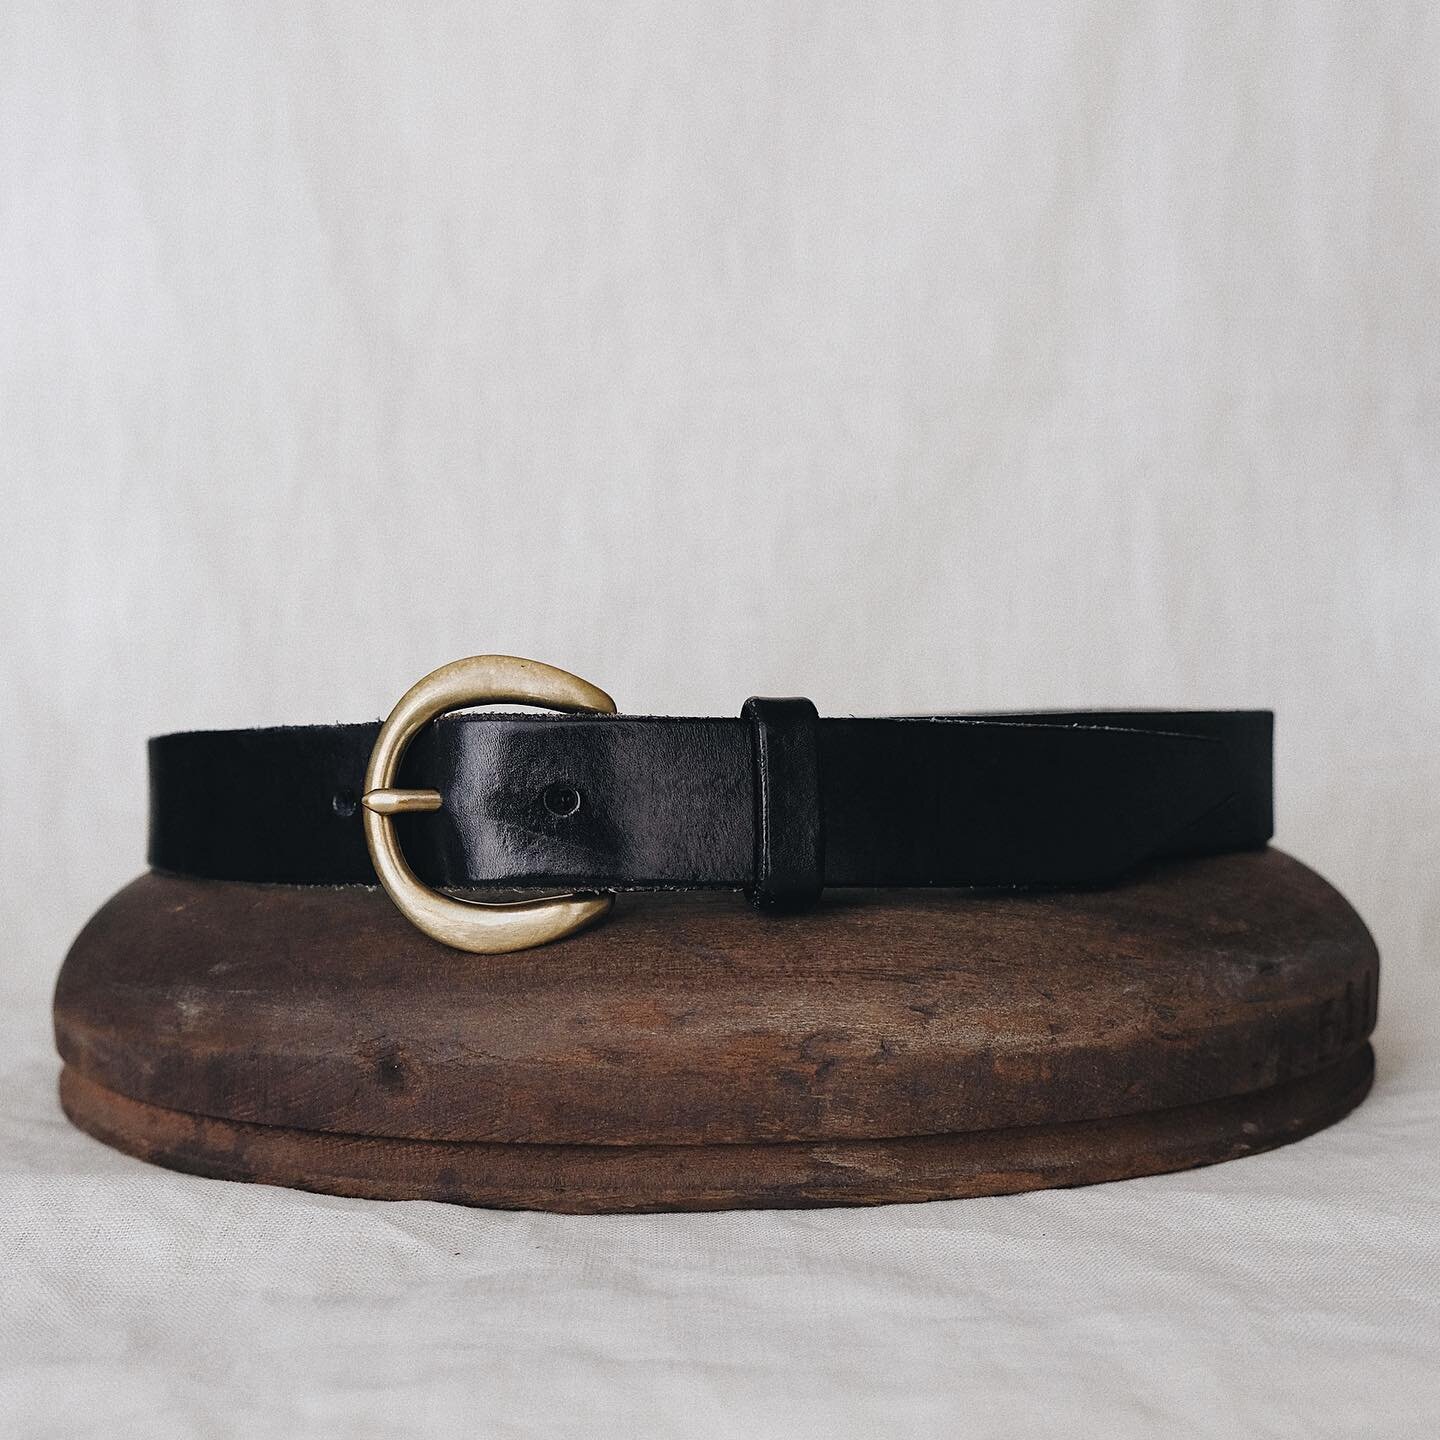 Classic unisex belt, regular width (1.25&rdquo;) in black. Unfinished solid brass buckle + vegetable tanned leather. Made to measure ☞ DM for info/orders. ⠀⠀⠀⠀⠀⠀⠀⠀⠀
&mdash;
#handmade #handcrafted #traditional #slowdesign #slowfashion #slowmade #essen